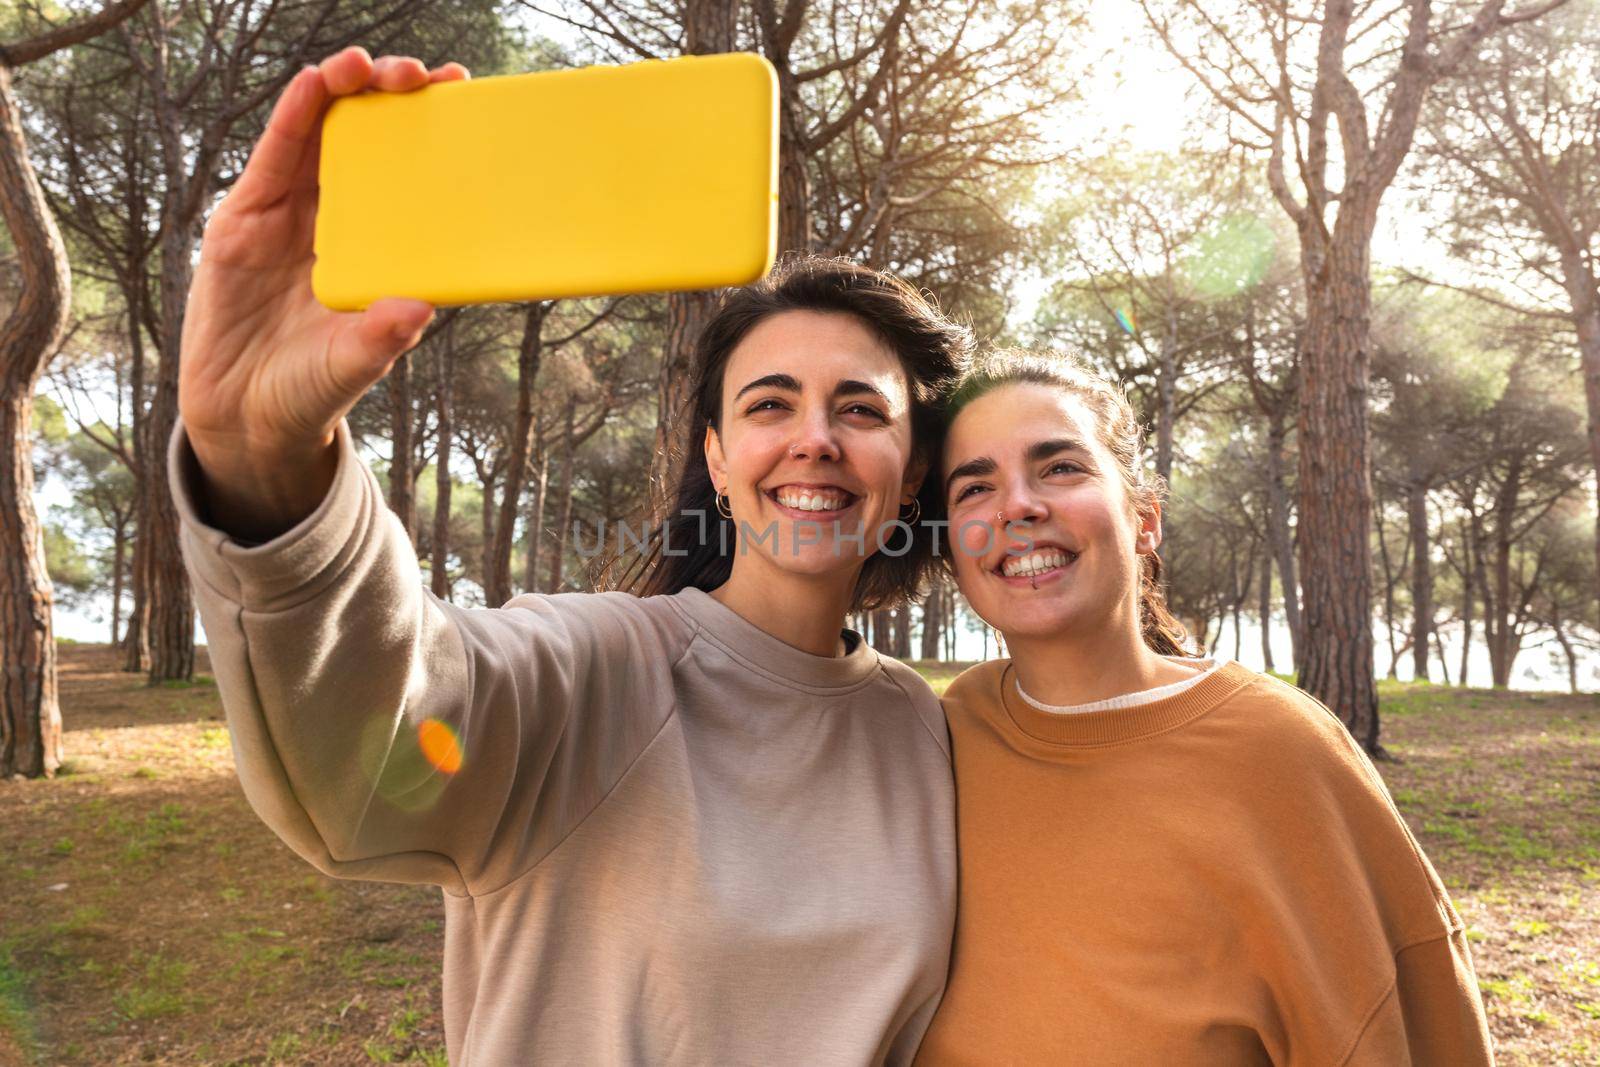 Happy and smiling young caucasian women take selfie using mobile phone in the forest. Hiking and nature concepts.